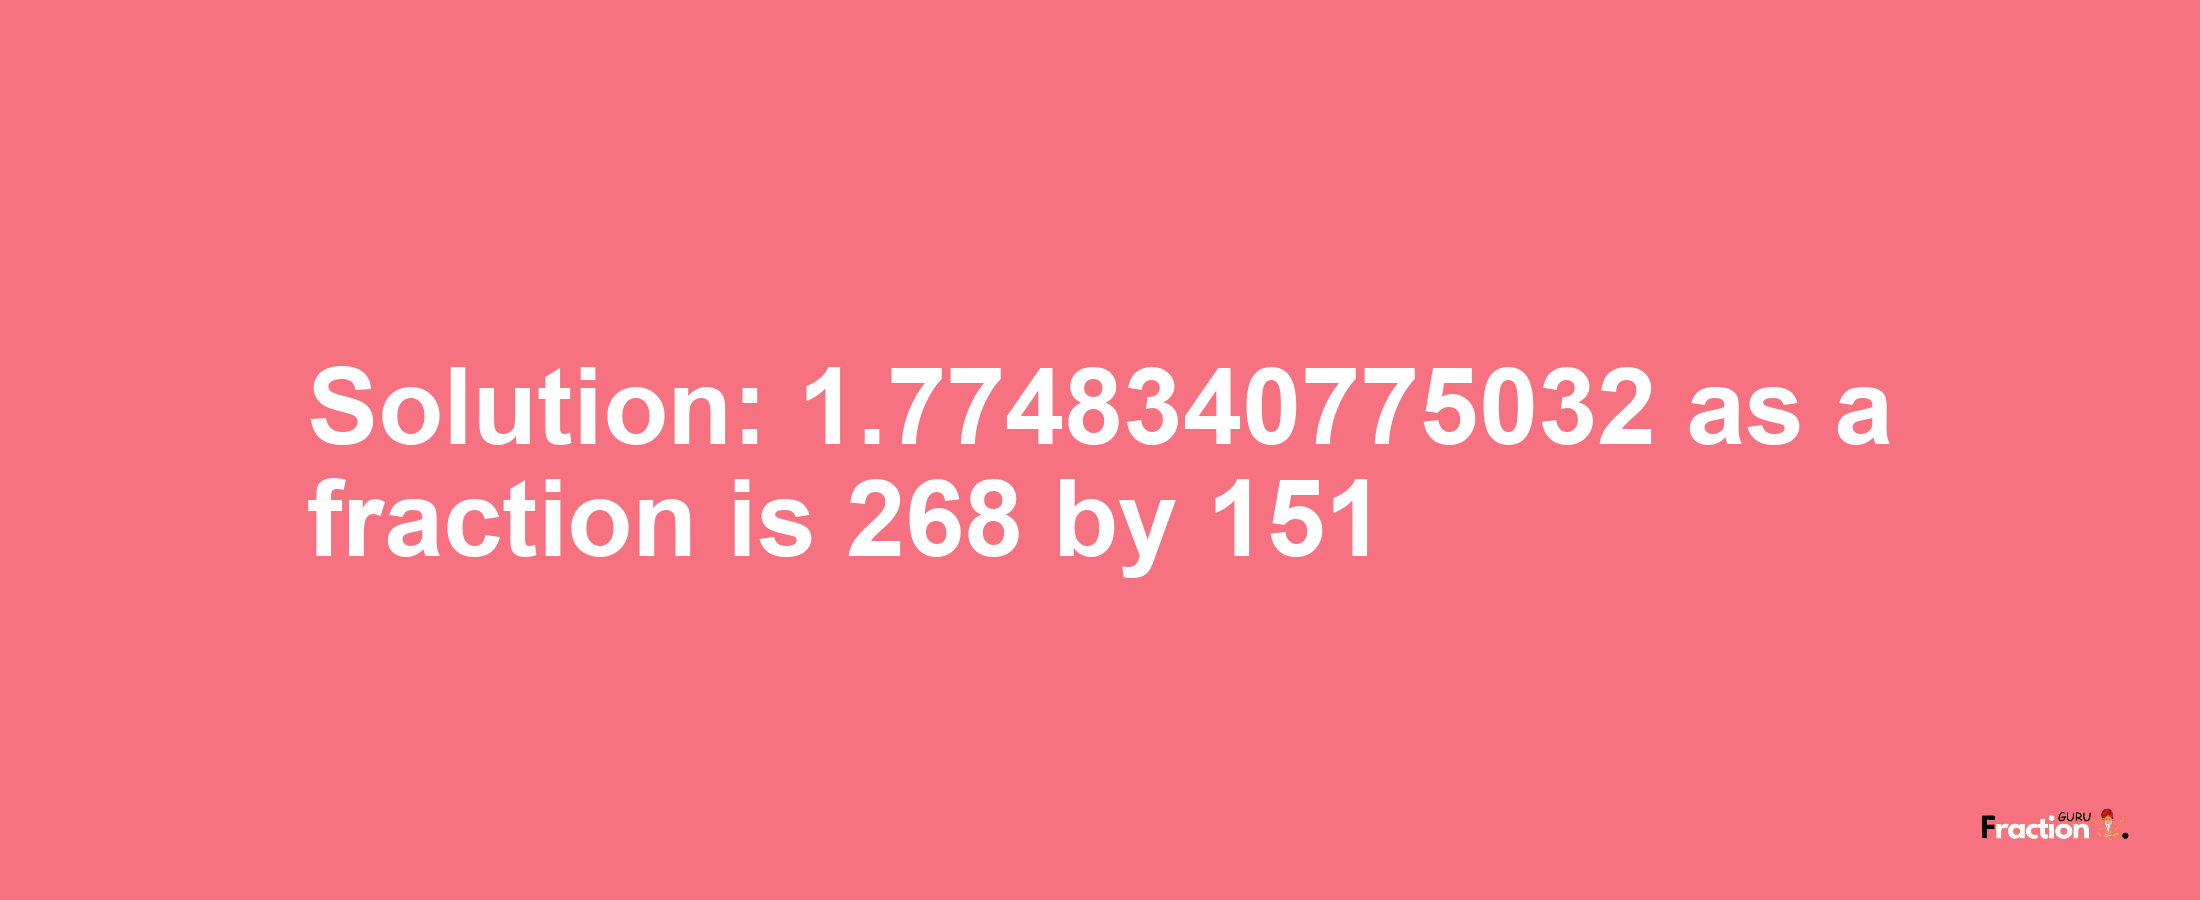 Solution:1.7748340775032 as a fraction is 268/151